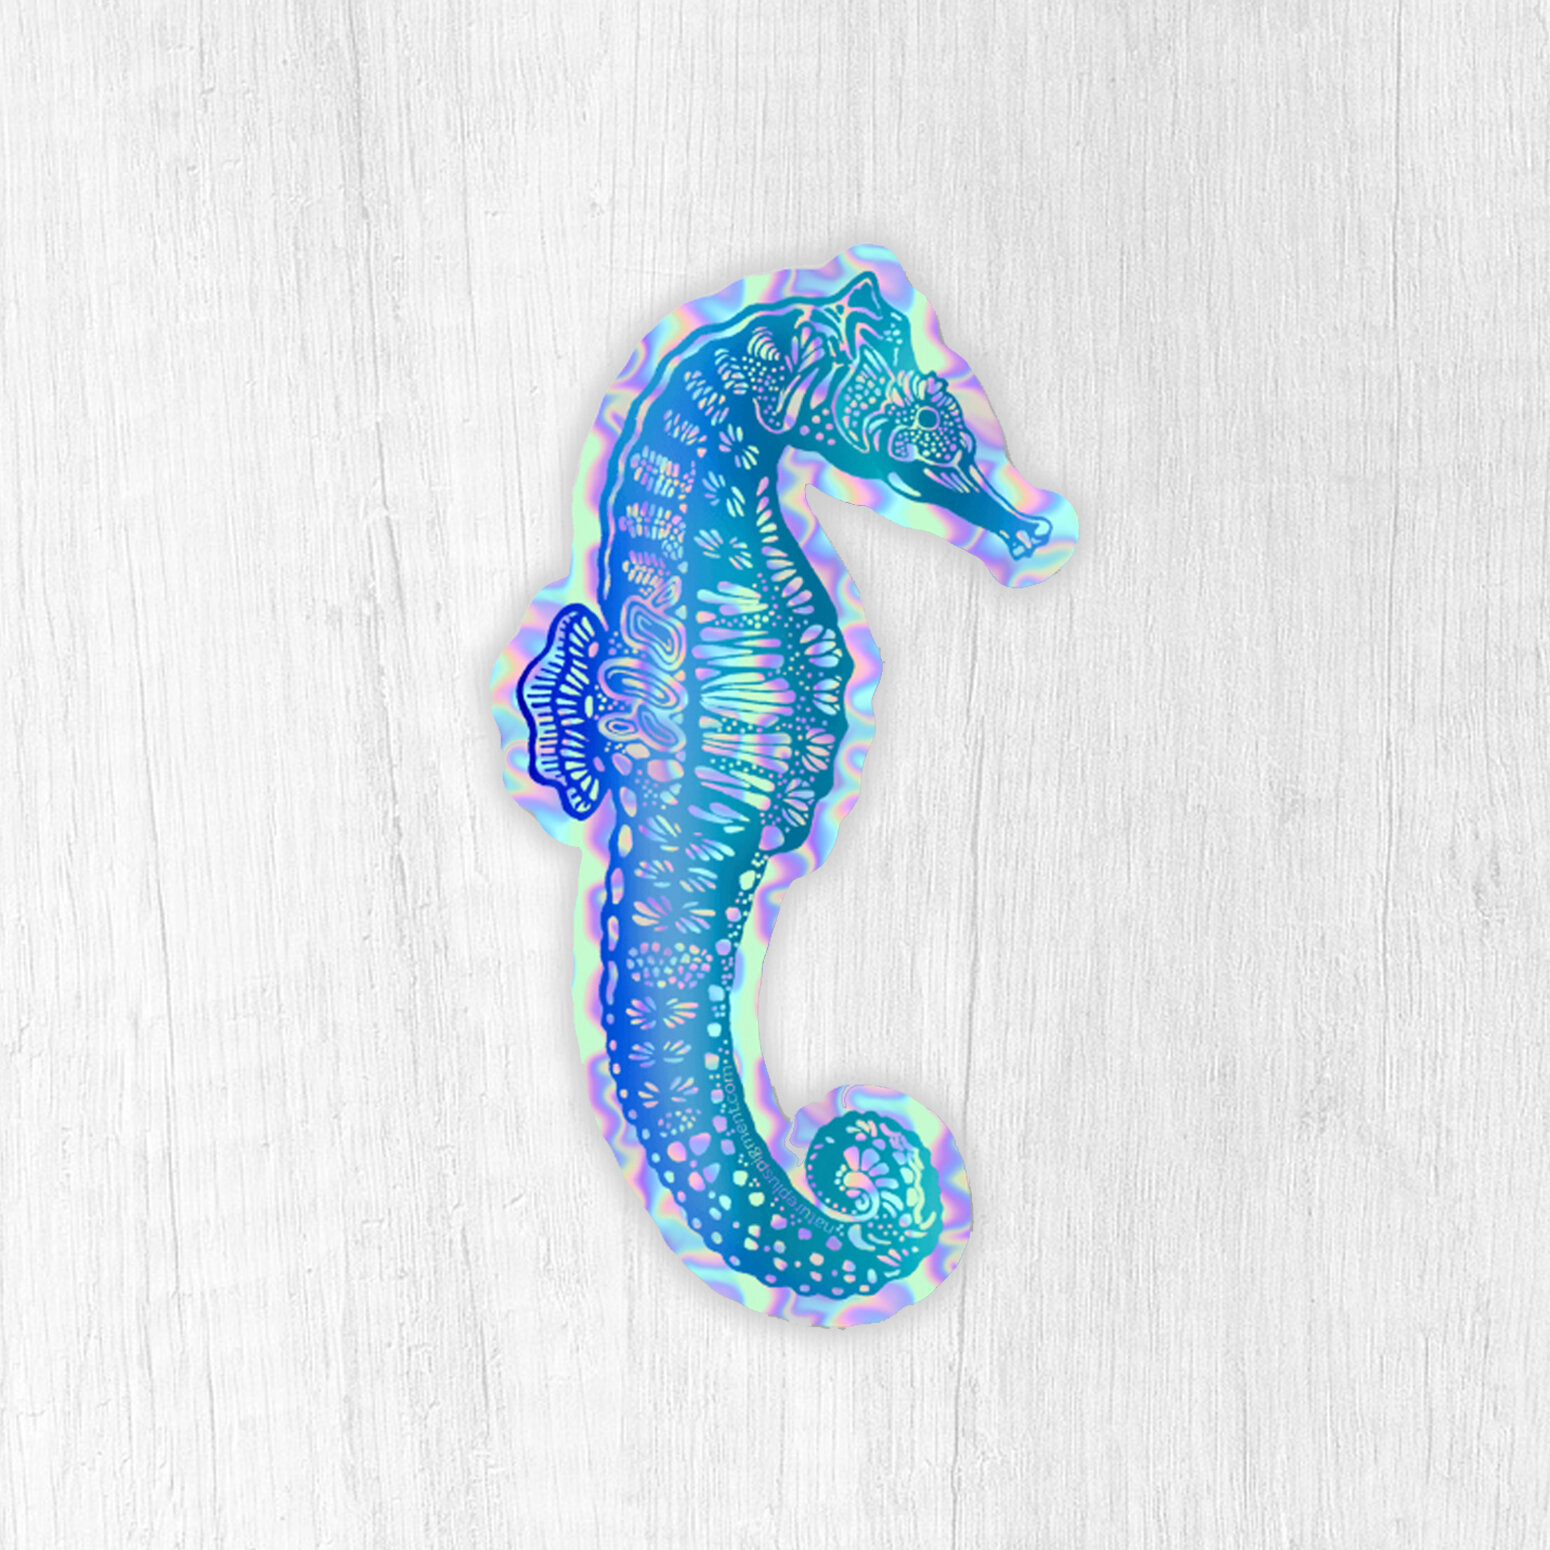 HolographicSeahorse_CMB.jpg